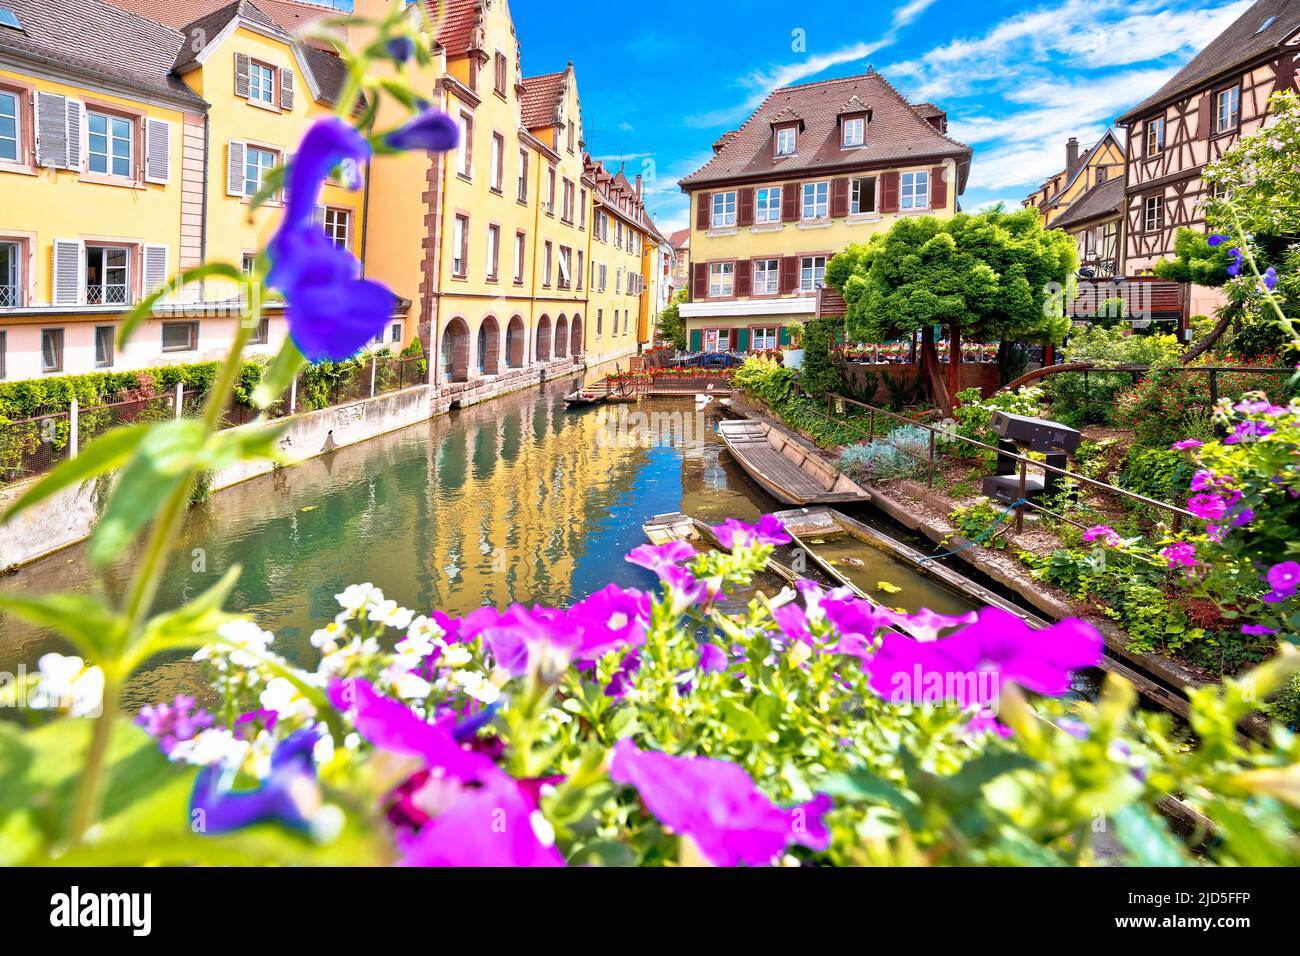 Town of Colmar little Venice colorful canal view, Alsace region of France Stock Photo